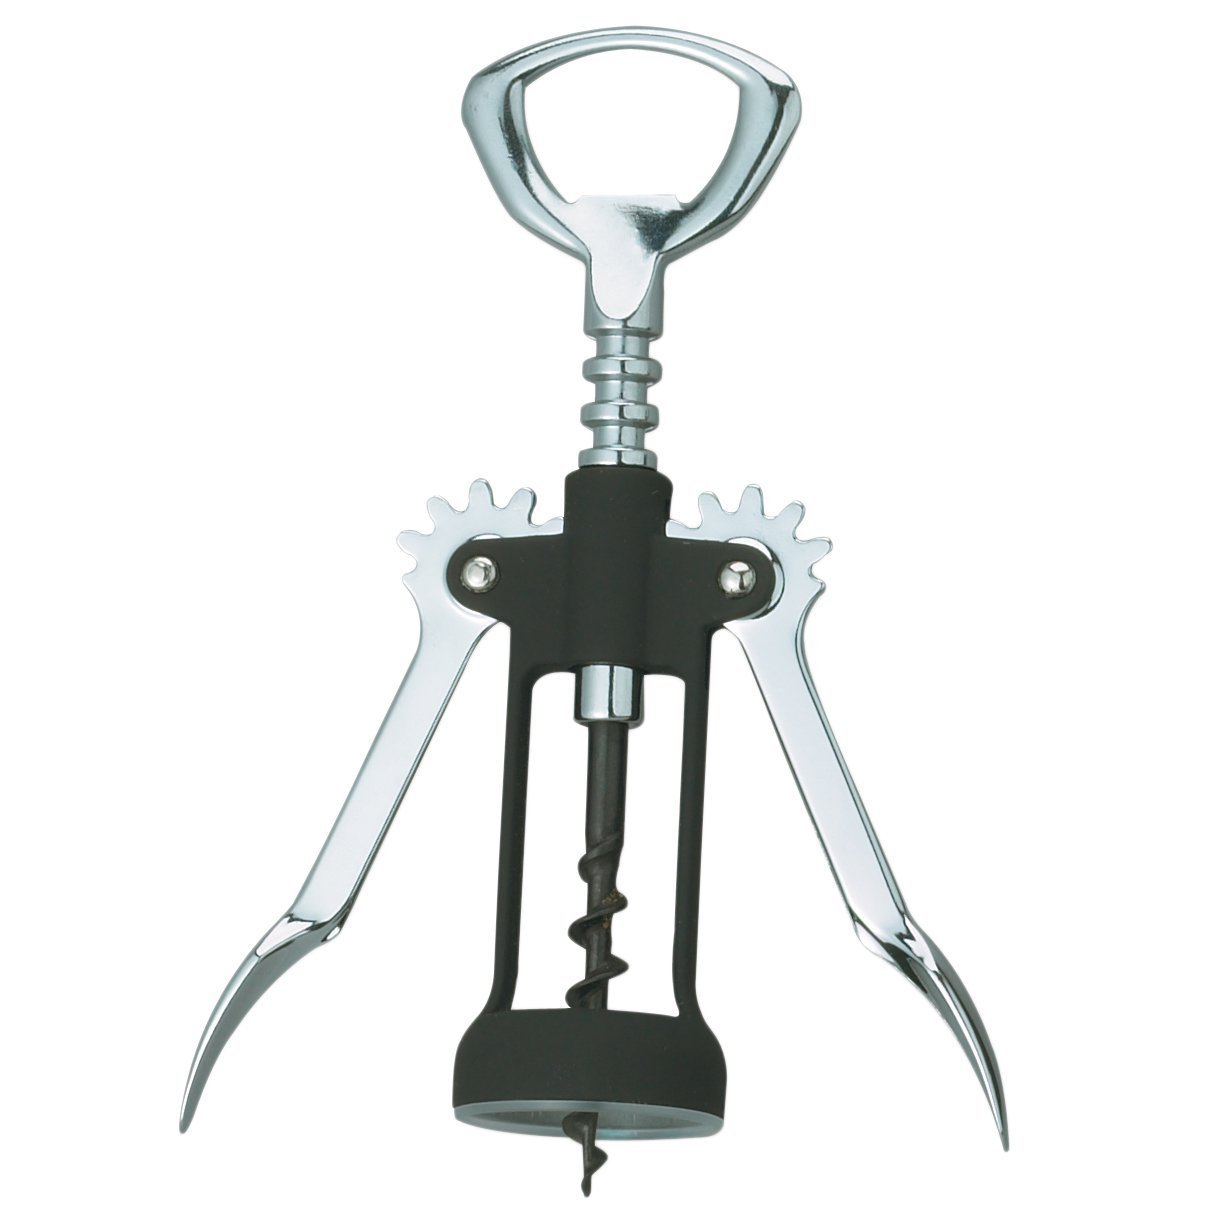 Fantes Rubber-Touch Wing Corkscrew, Made in Italy, 6.75-Inches x 2.625-Inches, The Italian Market Original since 1906 - Olde Church Emporium